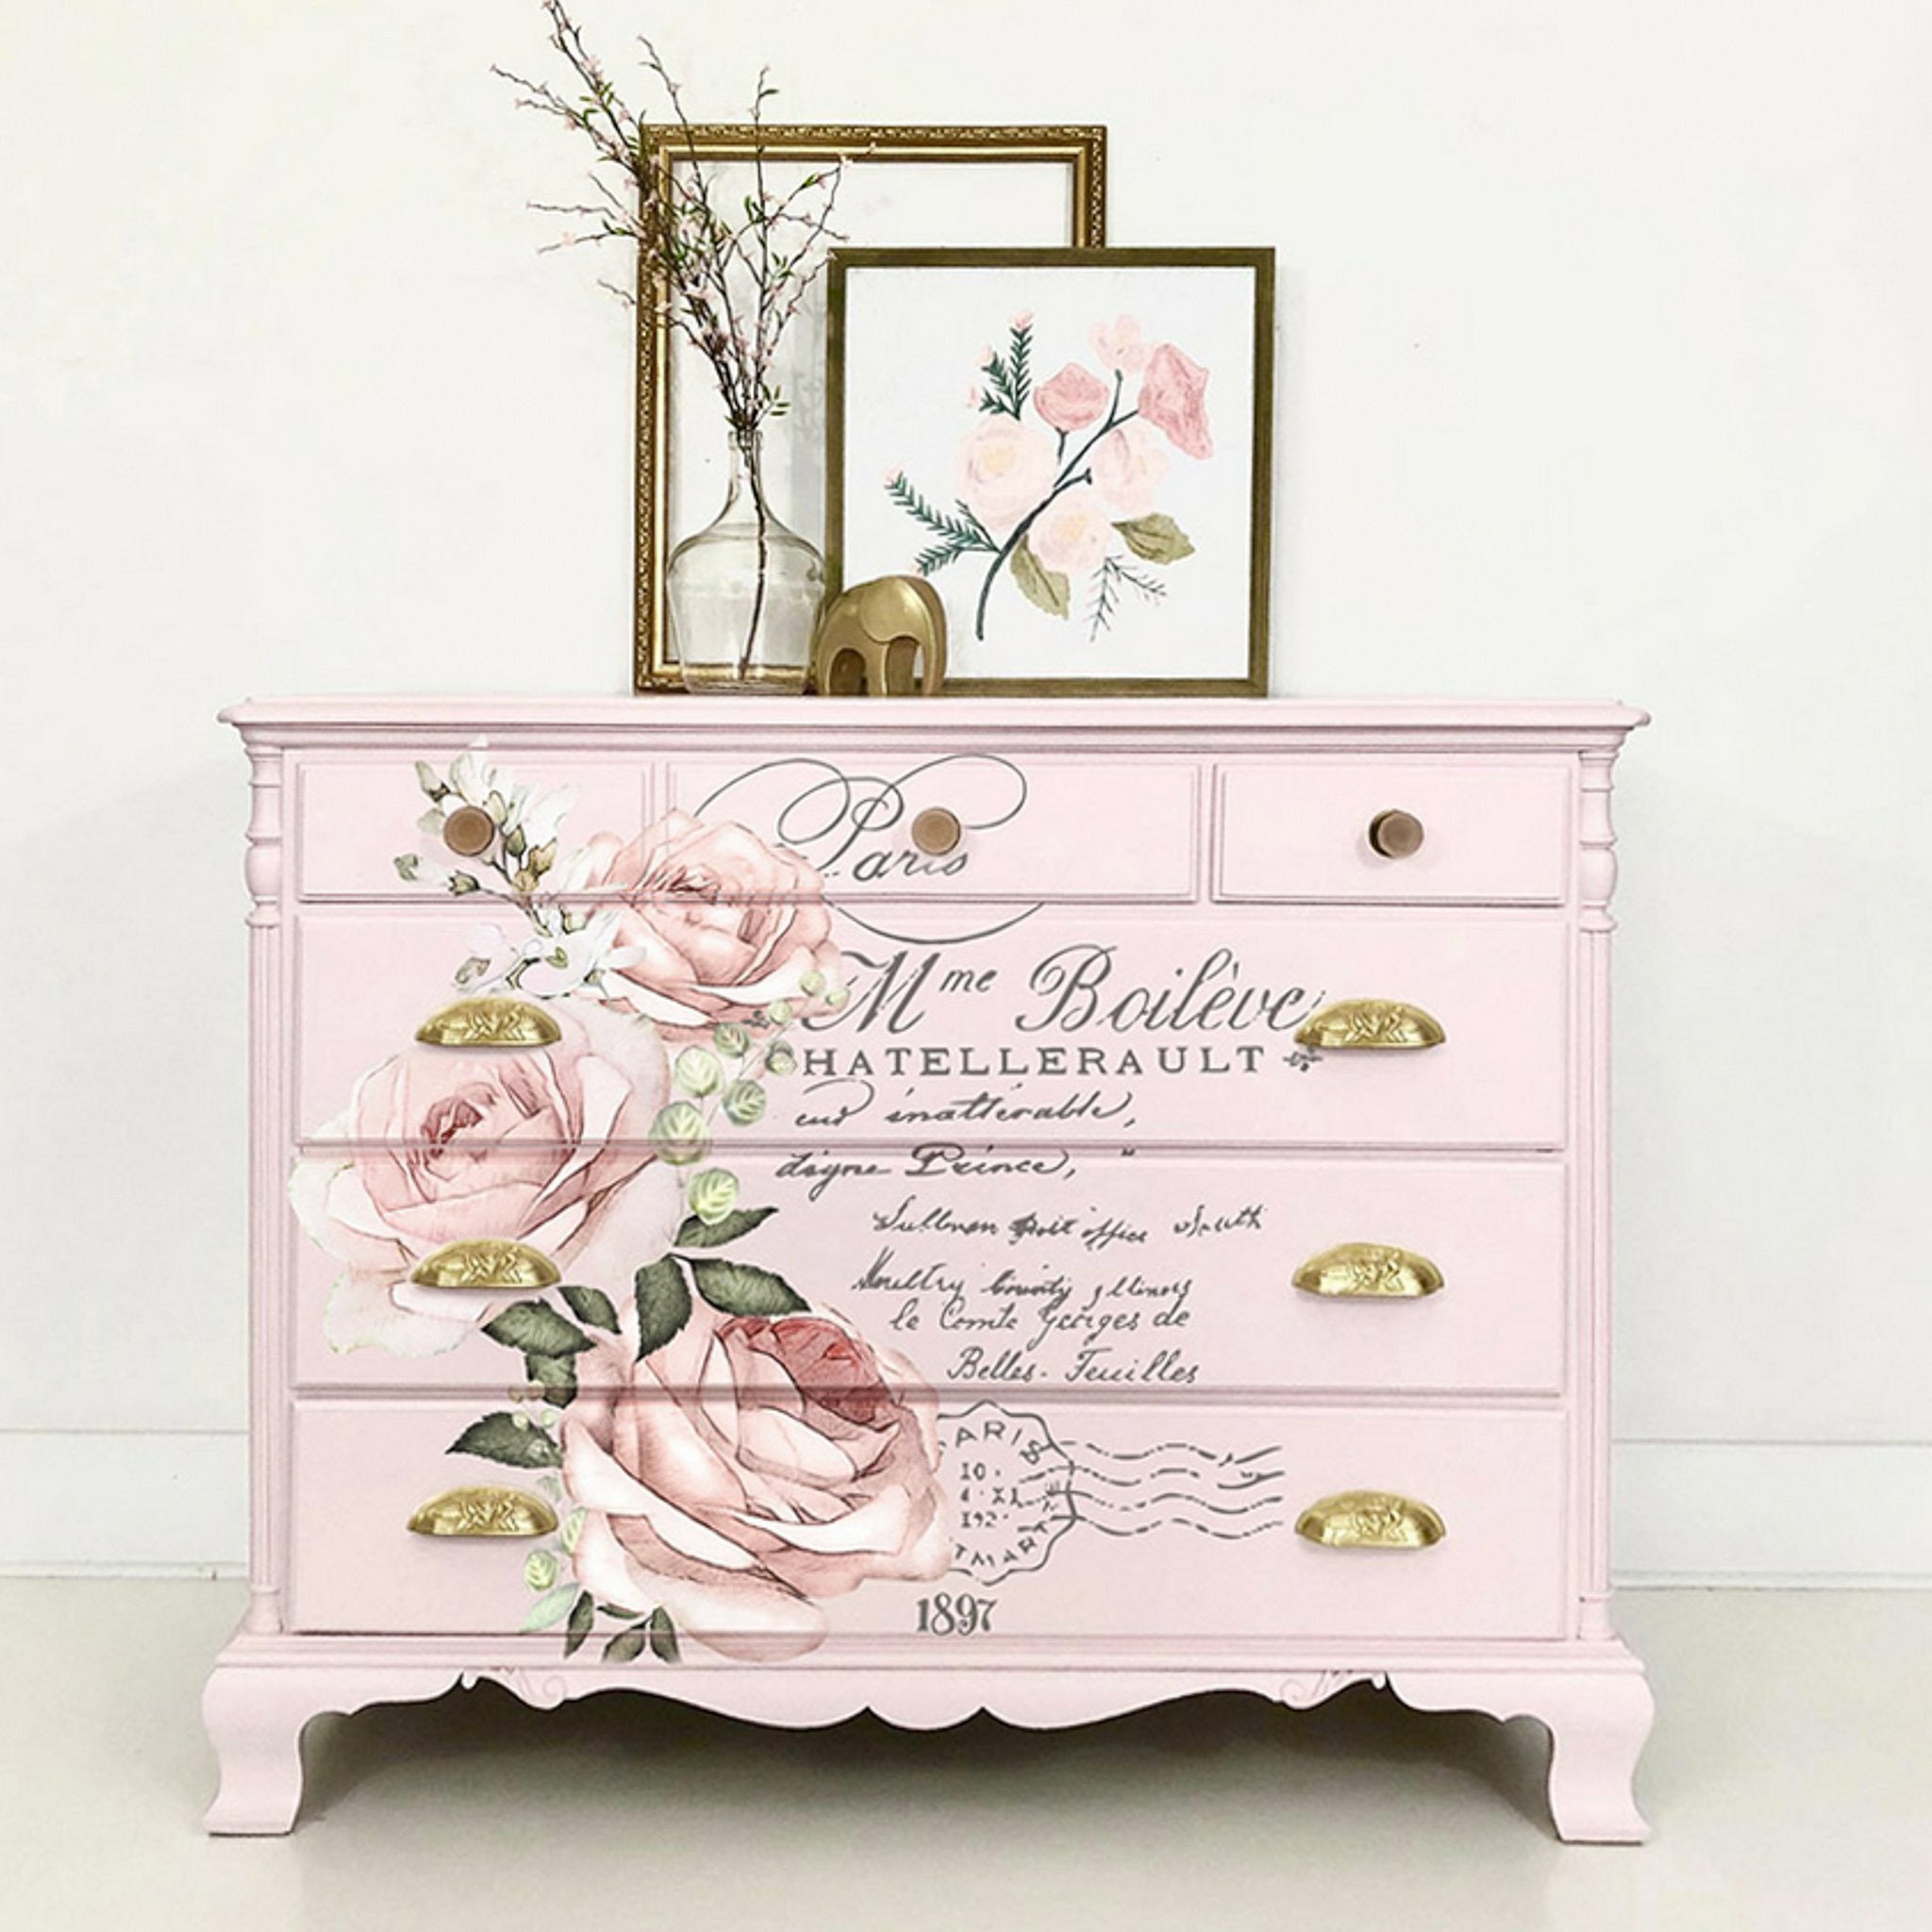 A vintage 6-drawer dresser is painted pale pink and features ReDesign with Prima's Chatellerault rub-on transfer on the drawers.